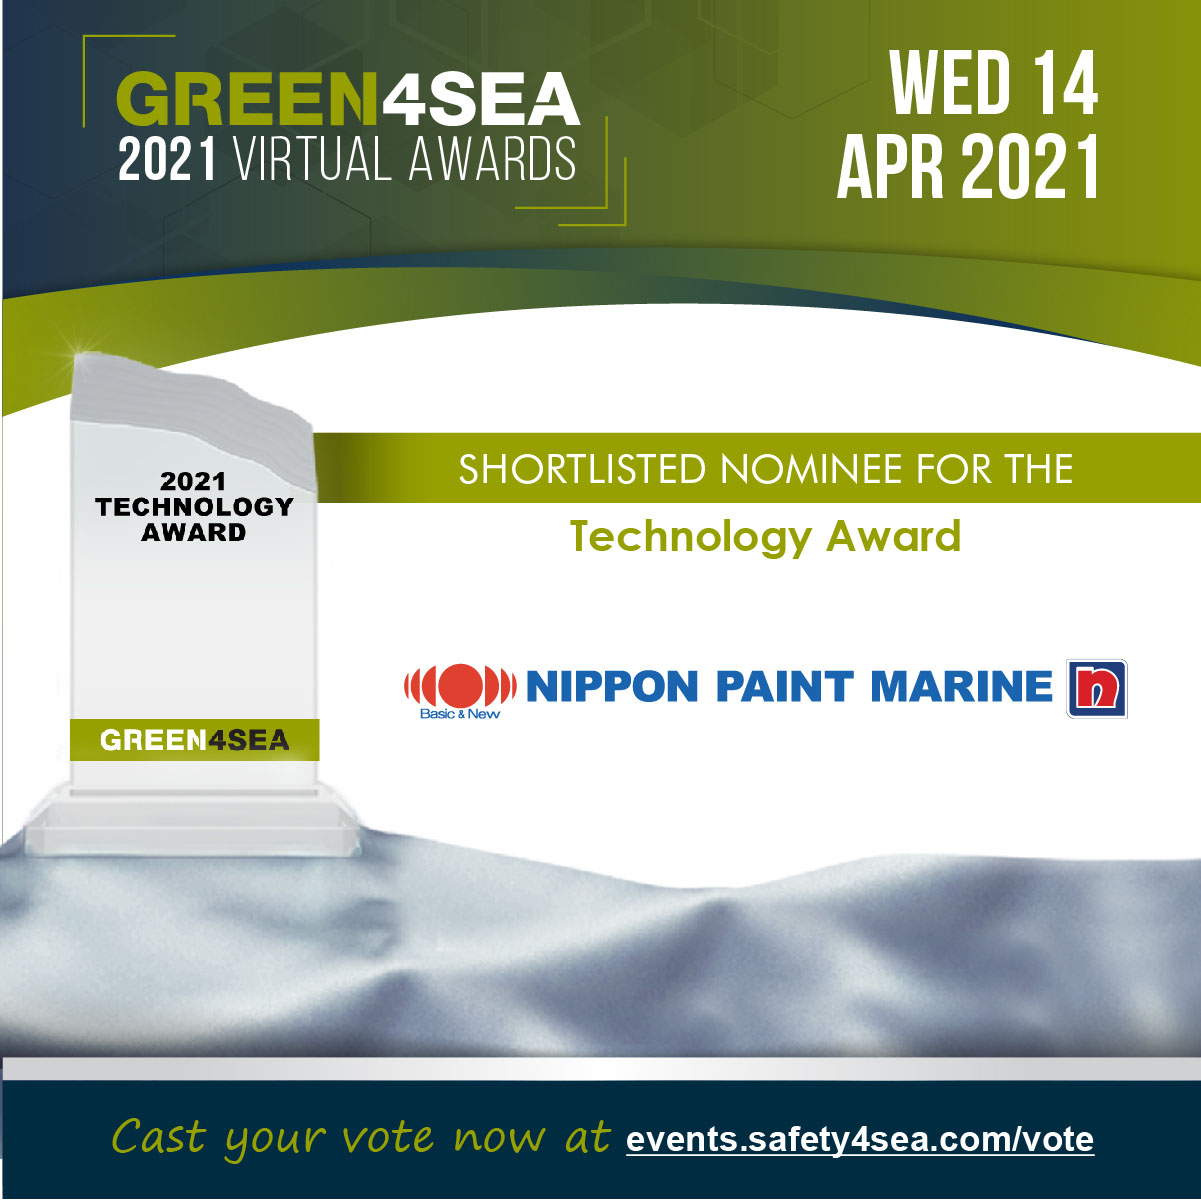 Nominated for the 2021 GREEN4SEA Technology Award